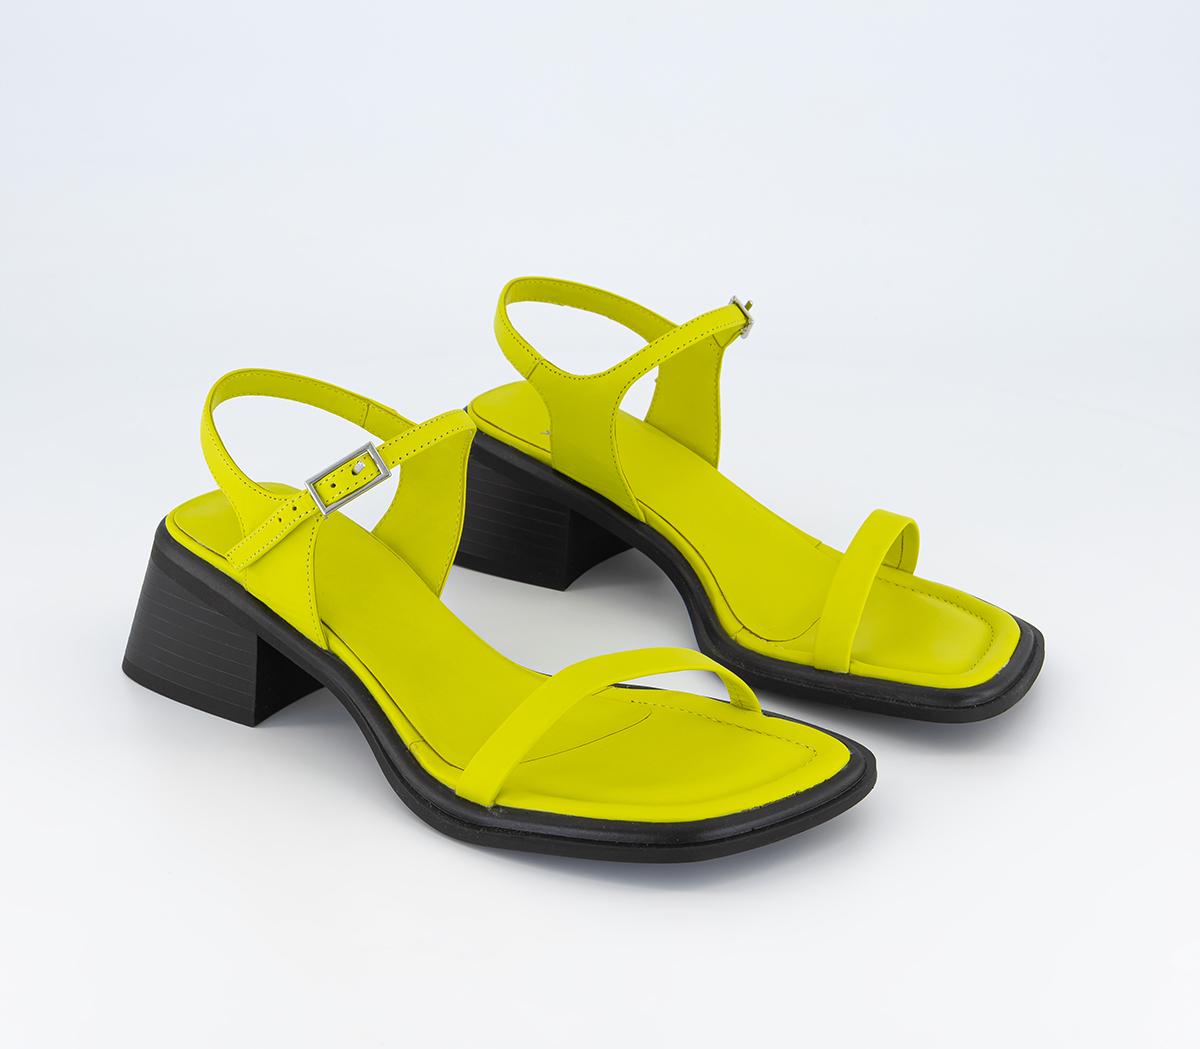 Vagabond Womens Ines Barley There Sandals Lime Green, 3